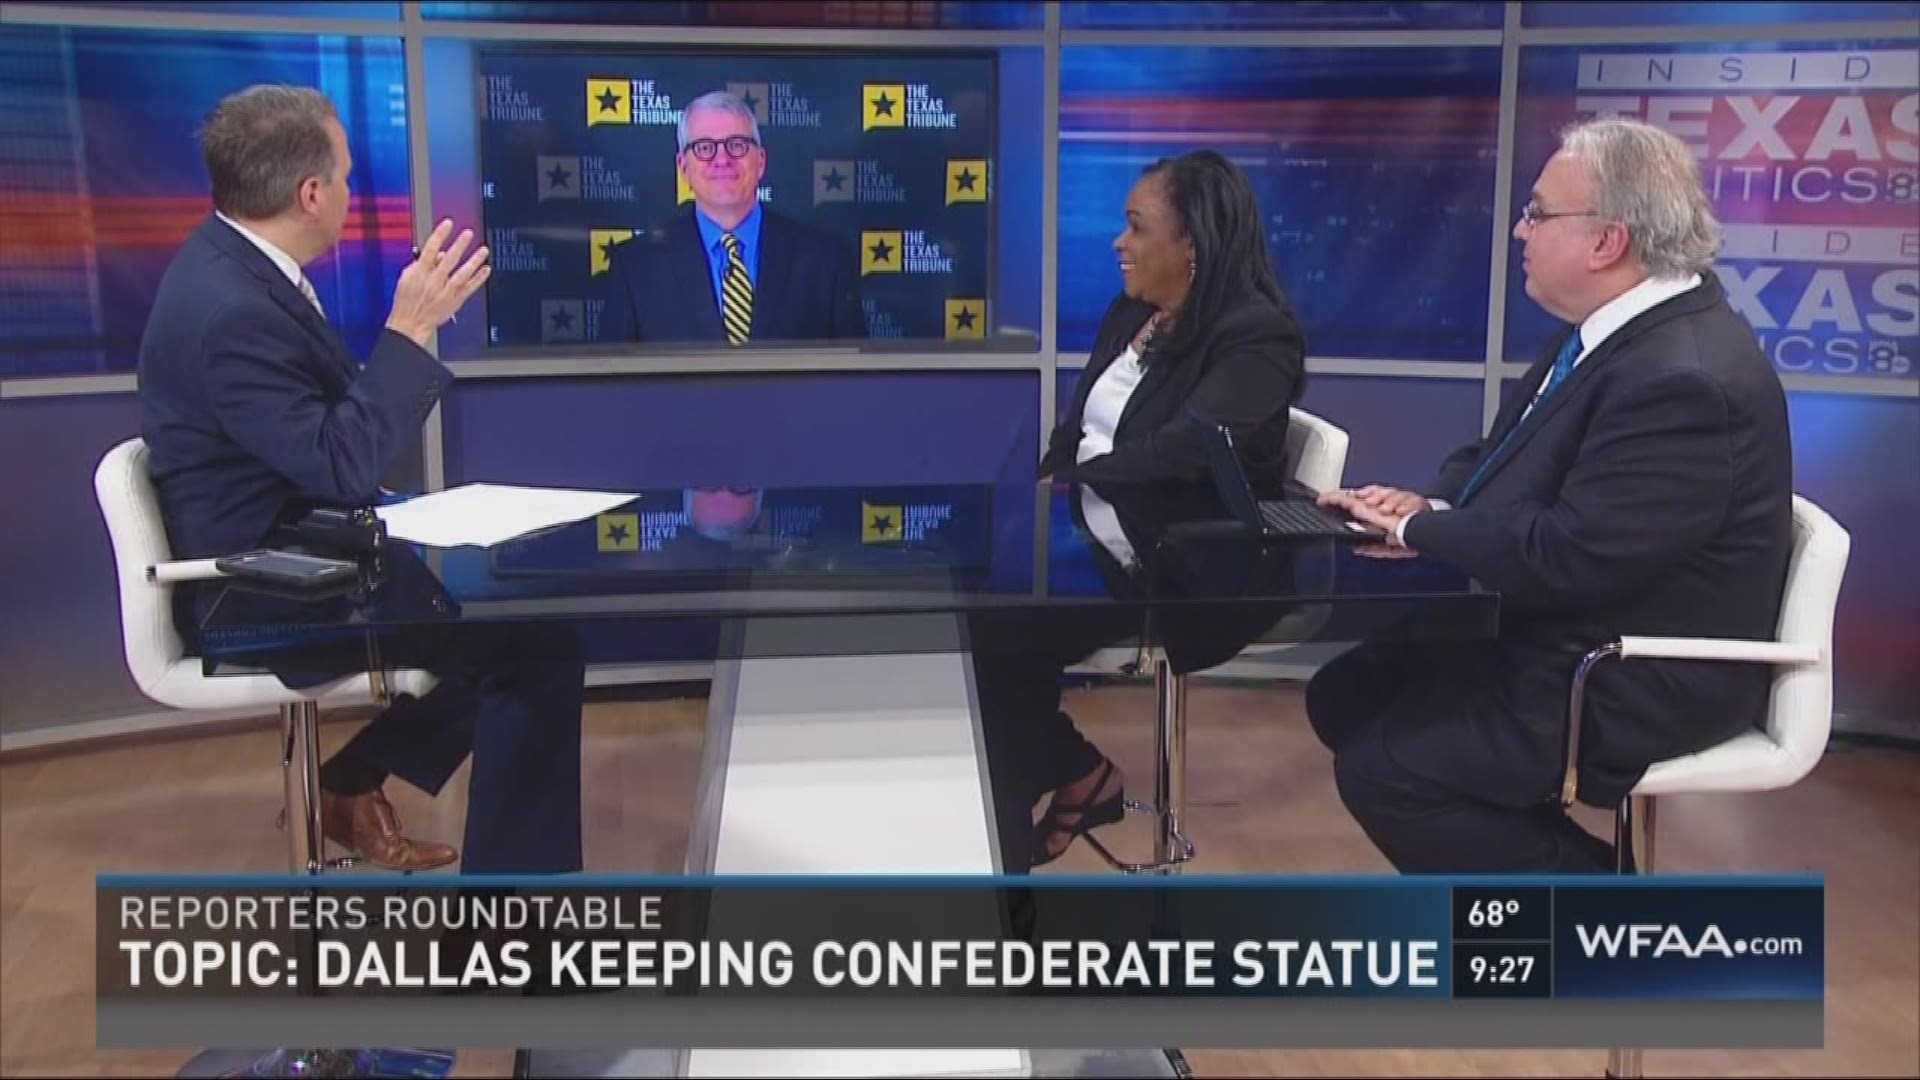 Reporters Roundtable puts the headlines in perspective each week. Host Jason, Bud and Ross returned along with Berna Dean Steptoe, WFAA's political producer. They examined whether race played a role in the sentencing in Tarrant County of three minority wo